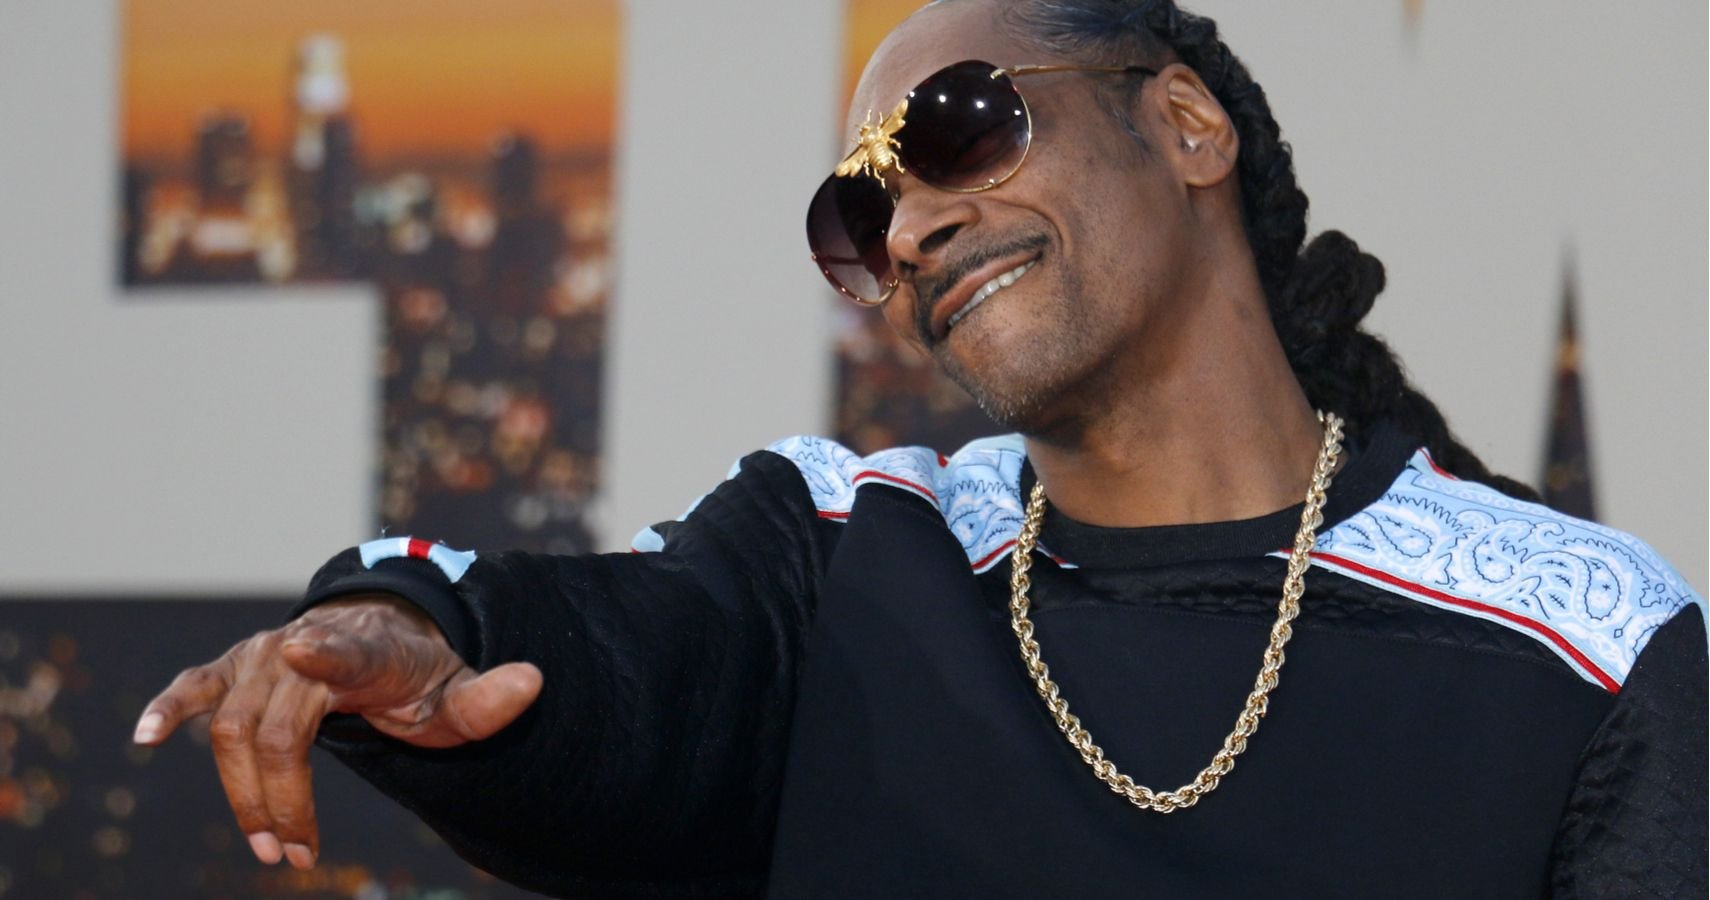 The Snoop Dogg Story: From Gangsta To A Successful Rapper